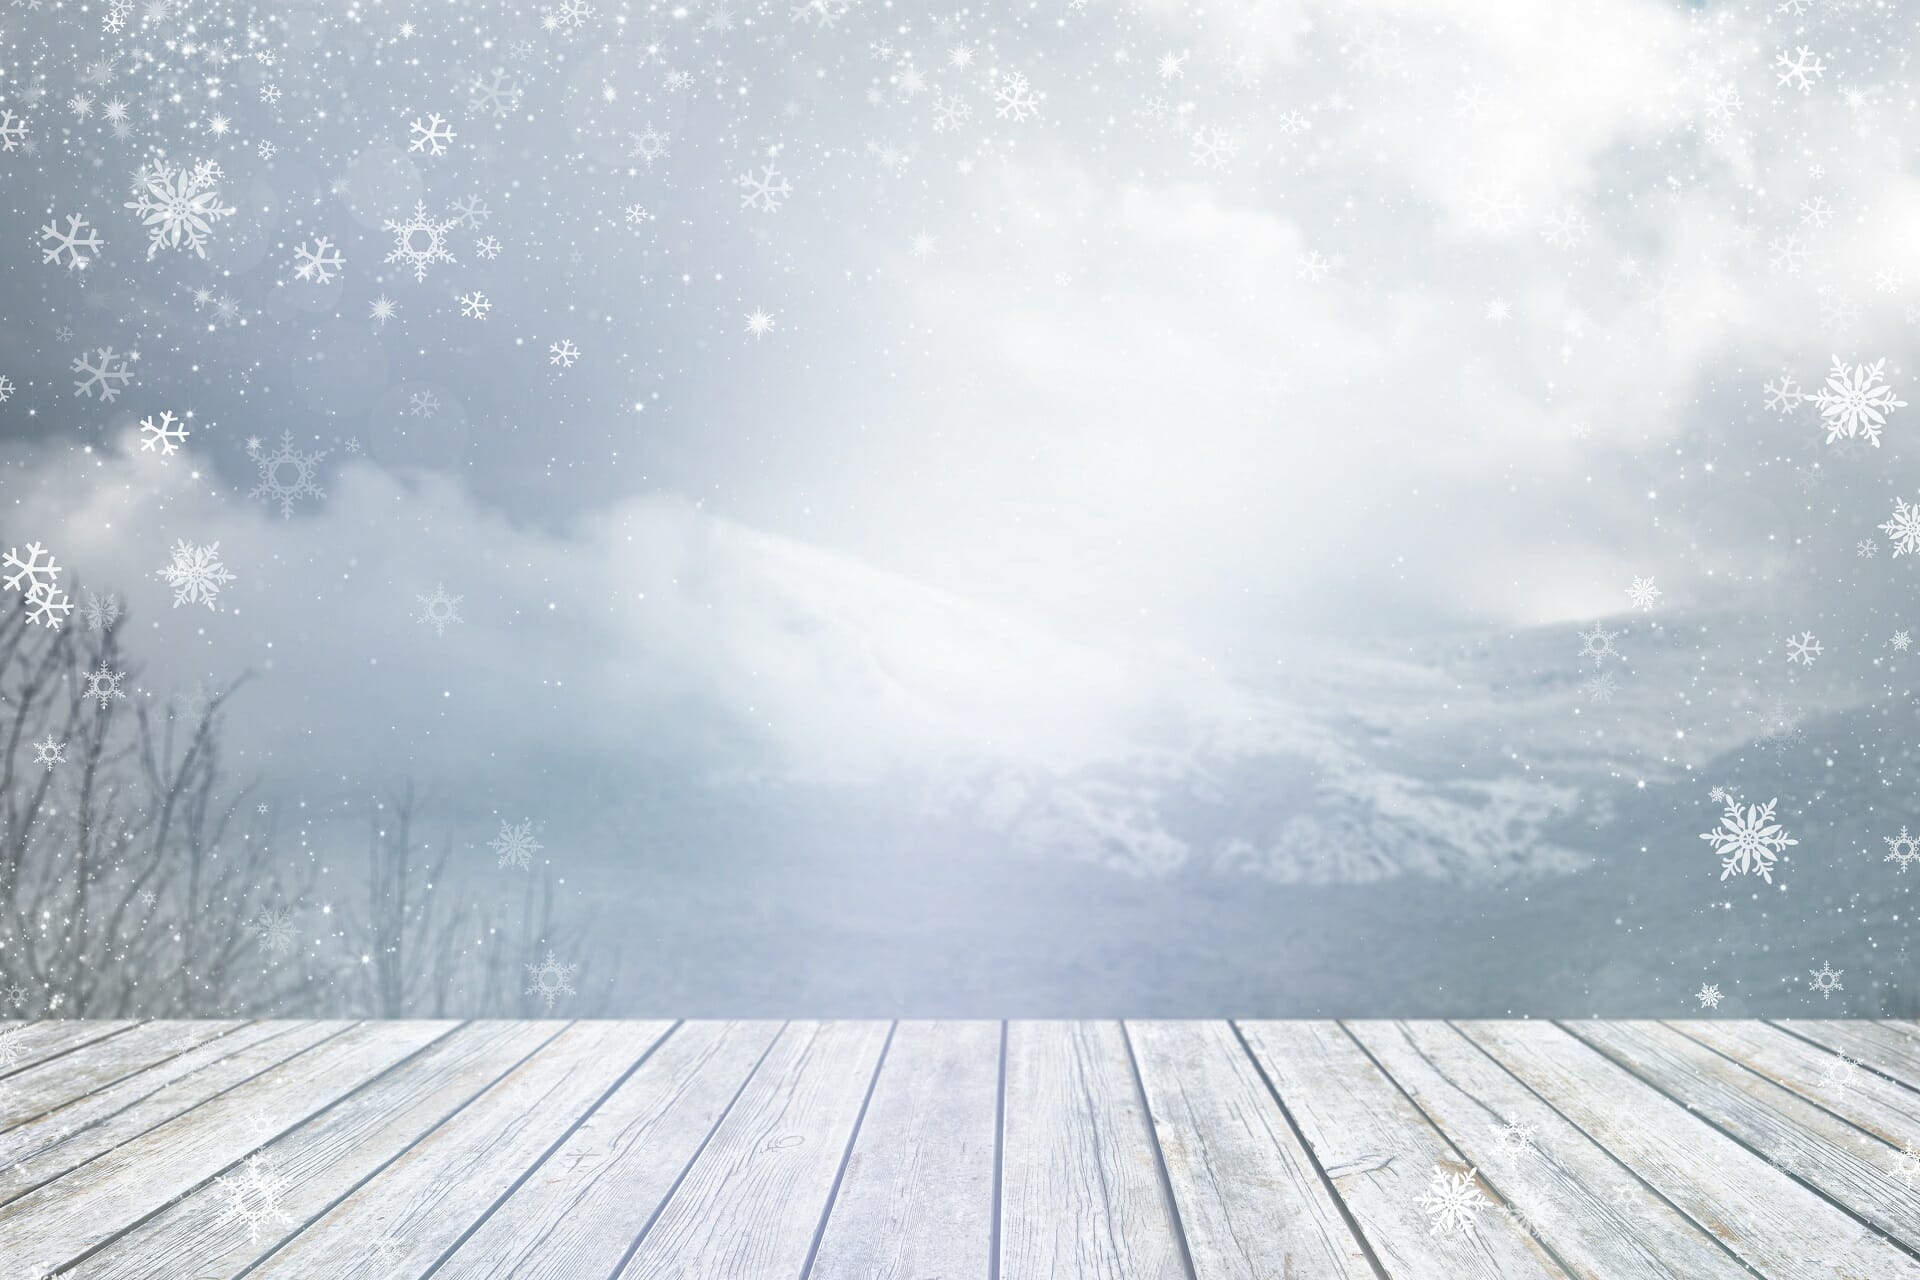 8 Best Winter Themes for Windows 10/11 [Free Download]